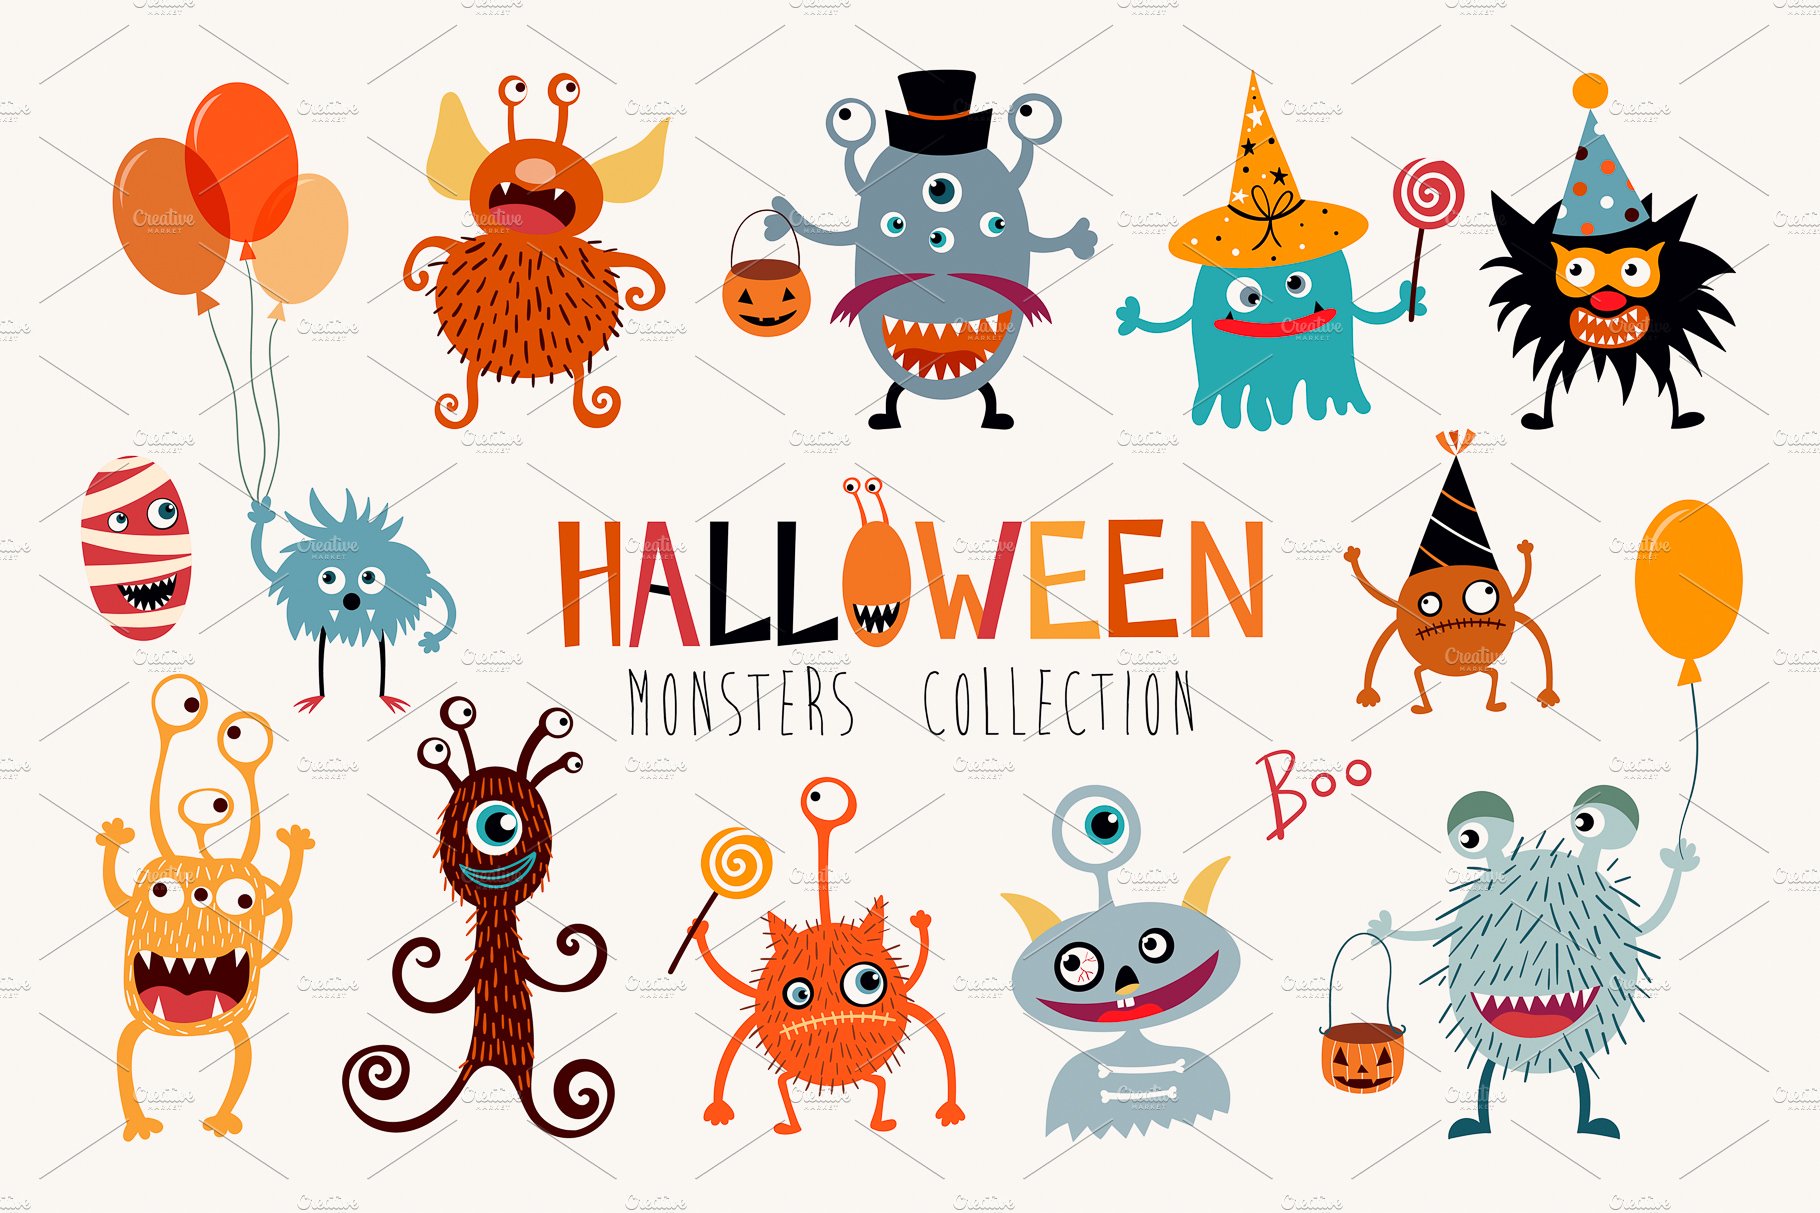 Halloween monsters collection cover image.